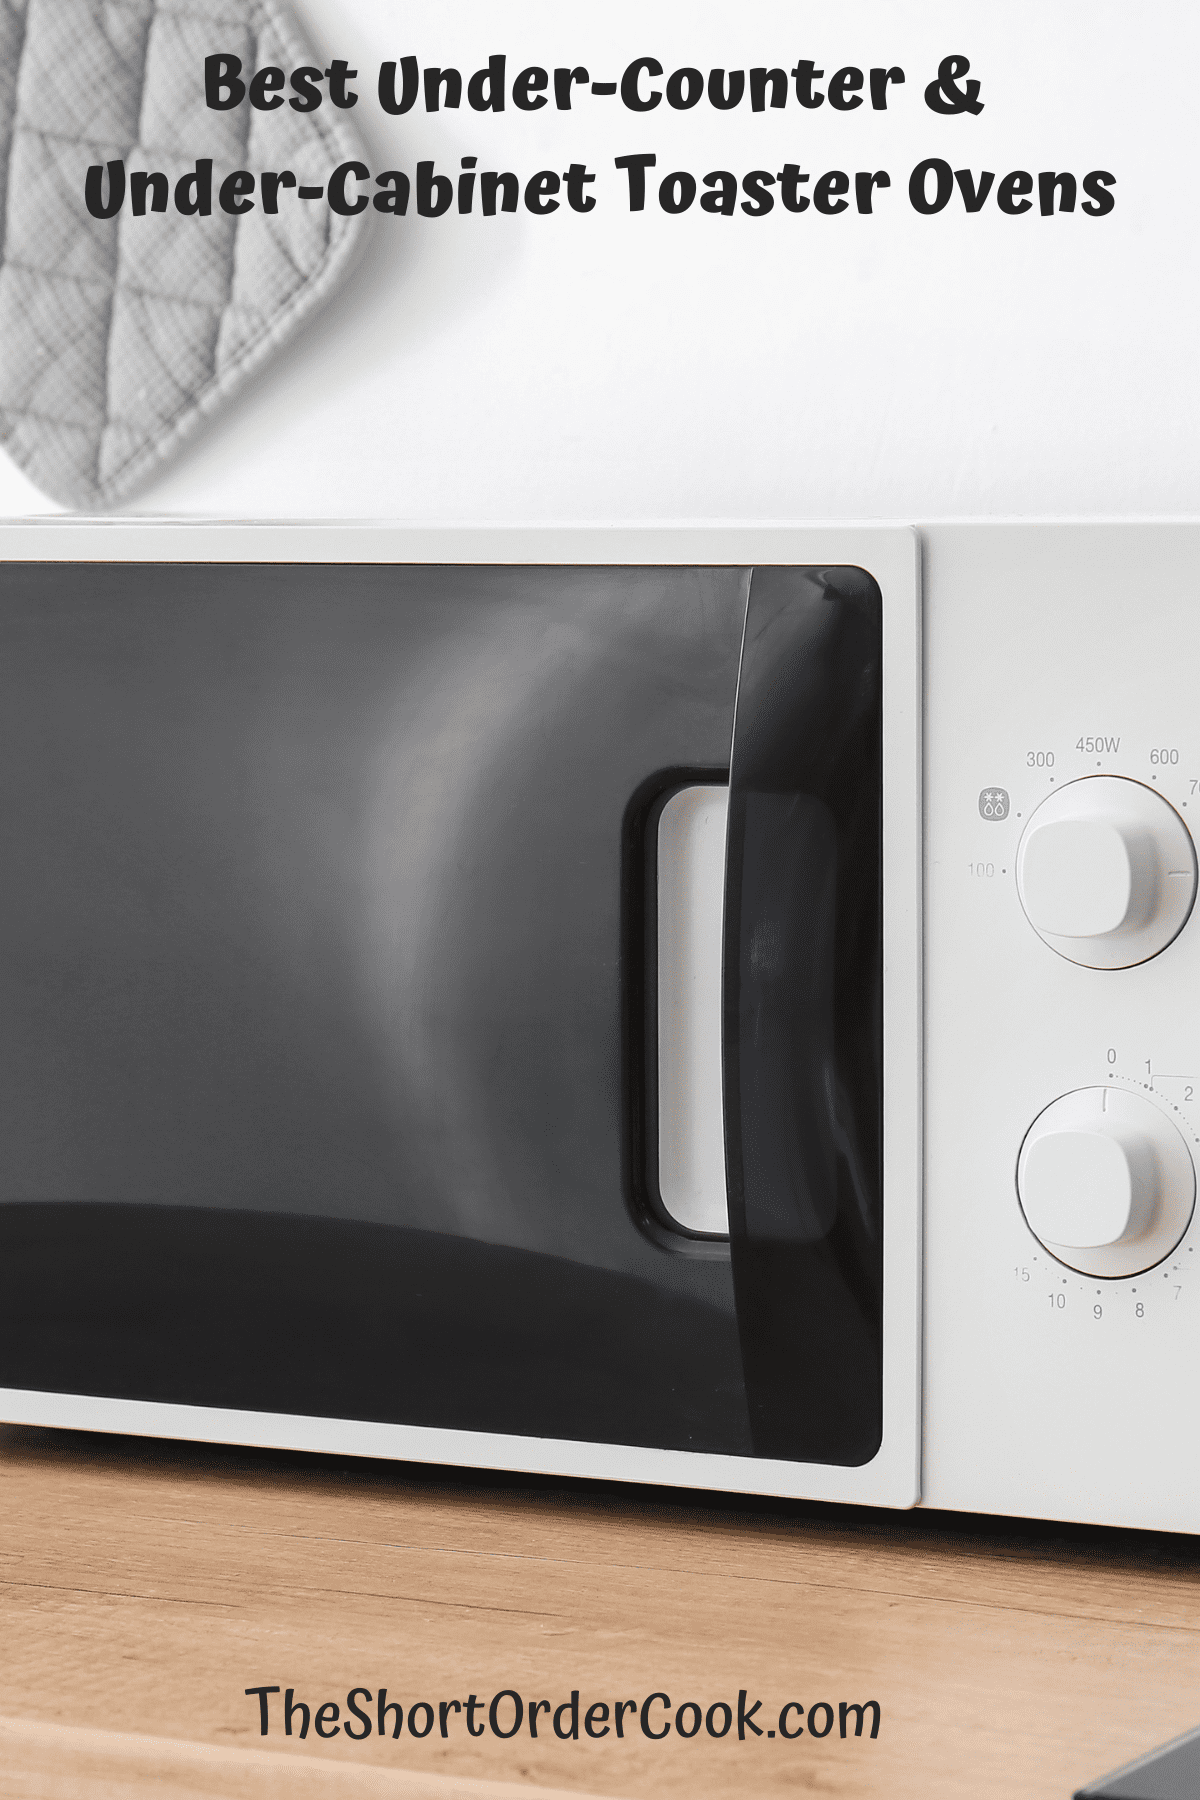 Best Under-Counter & Under-Cabinet Toaster Ovens to buy on Amazon.